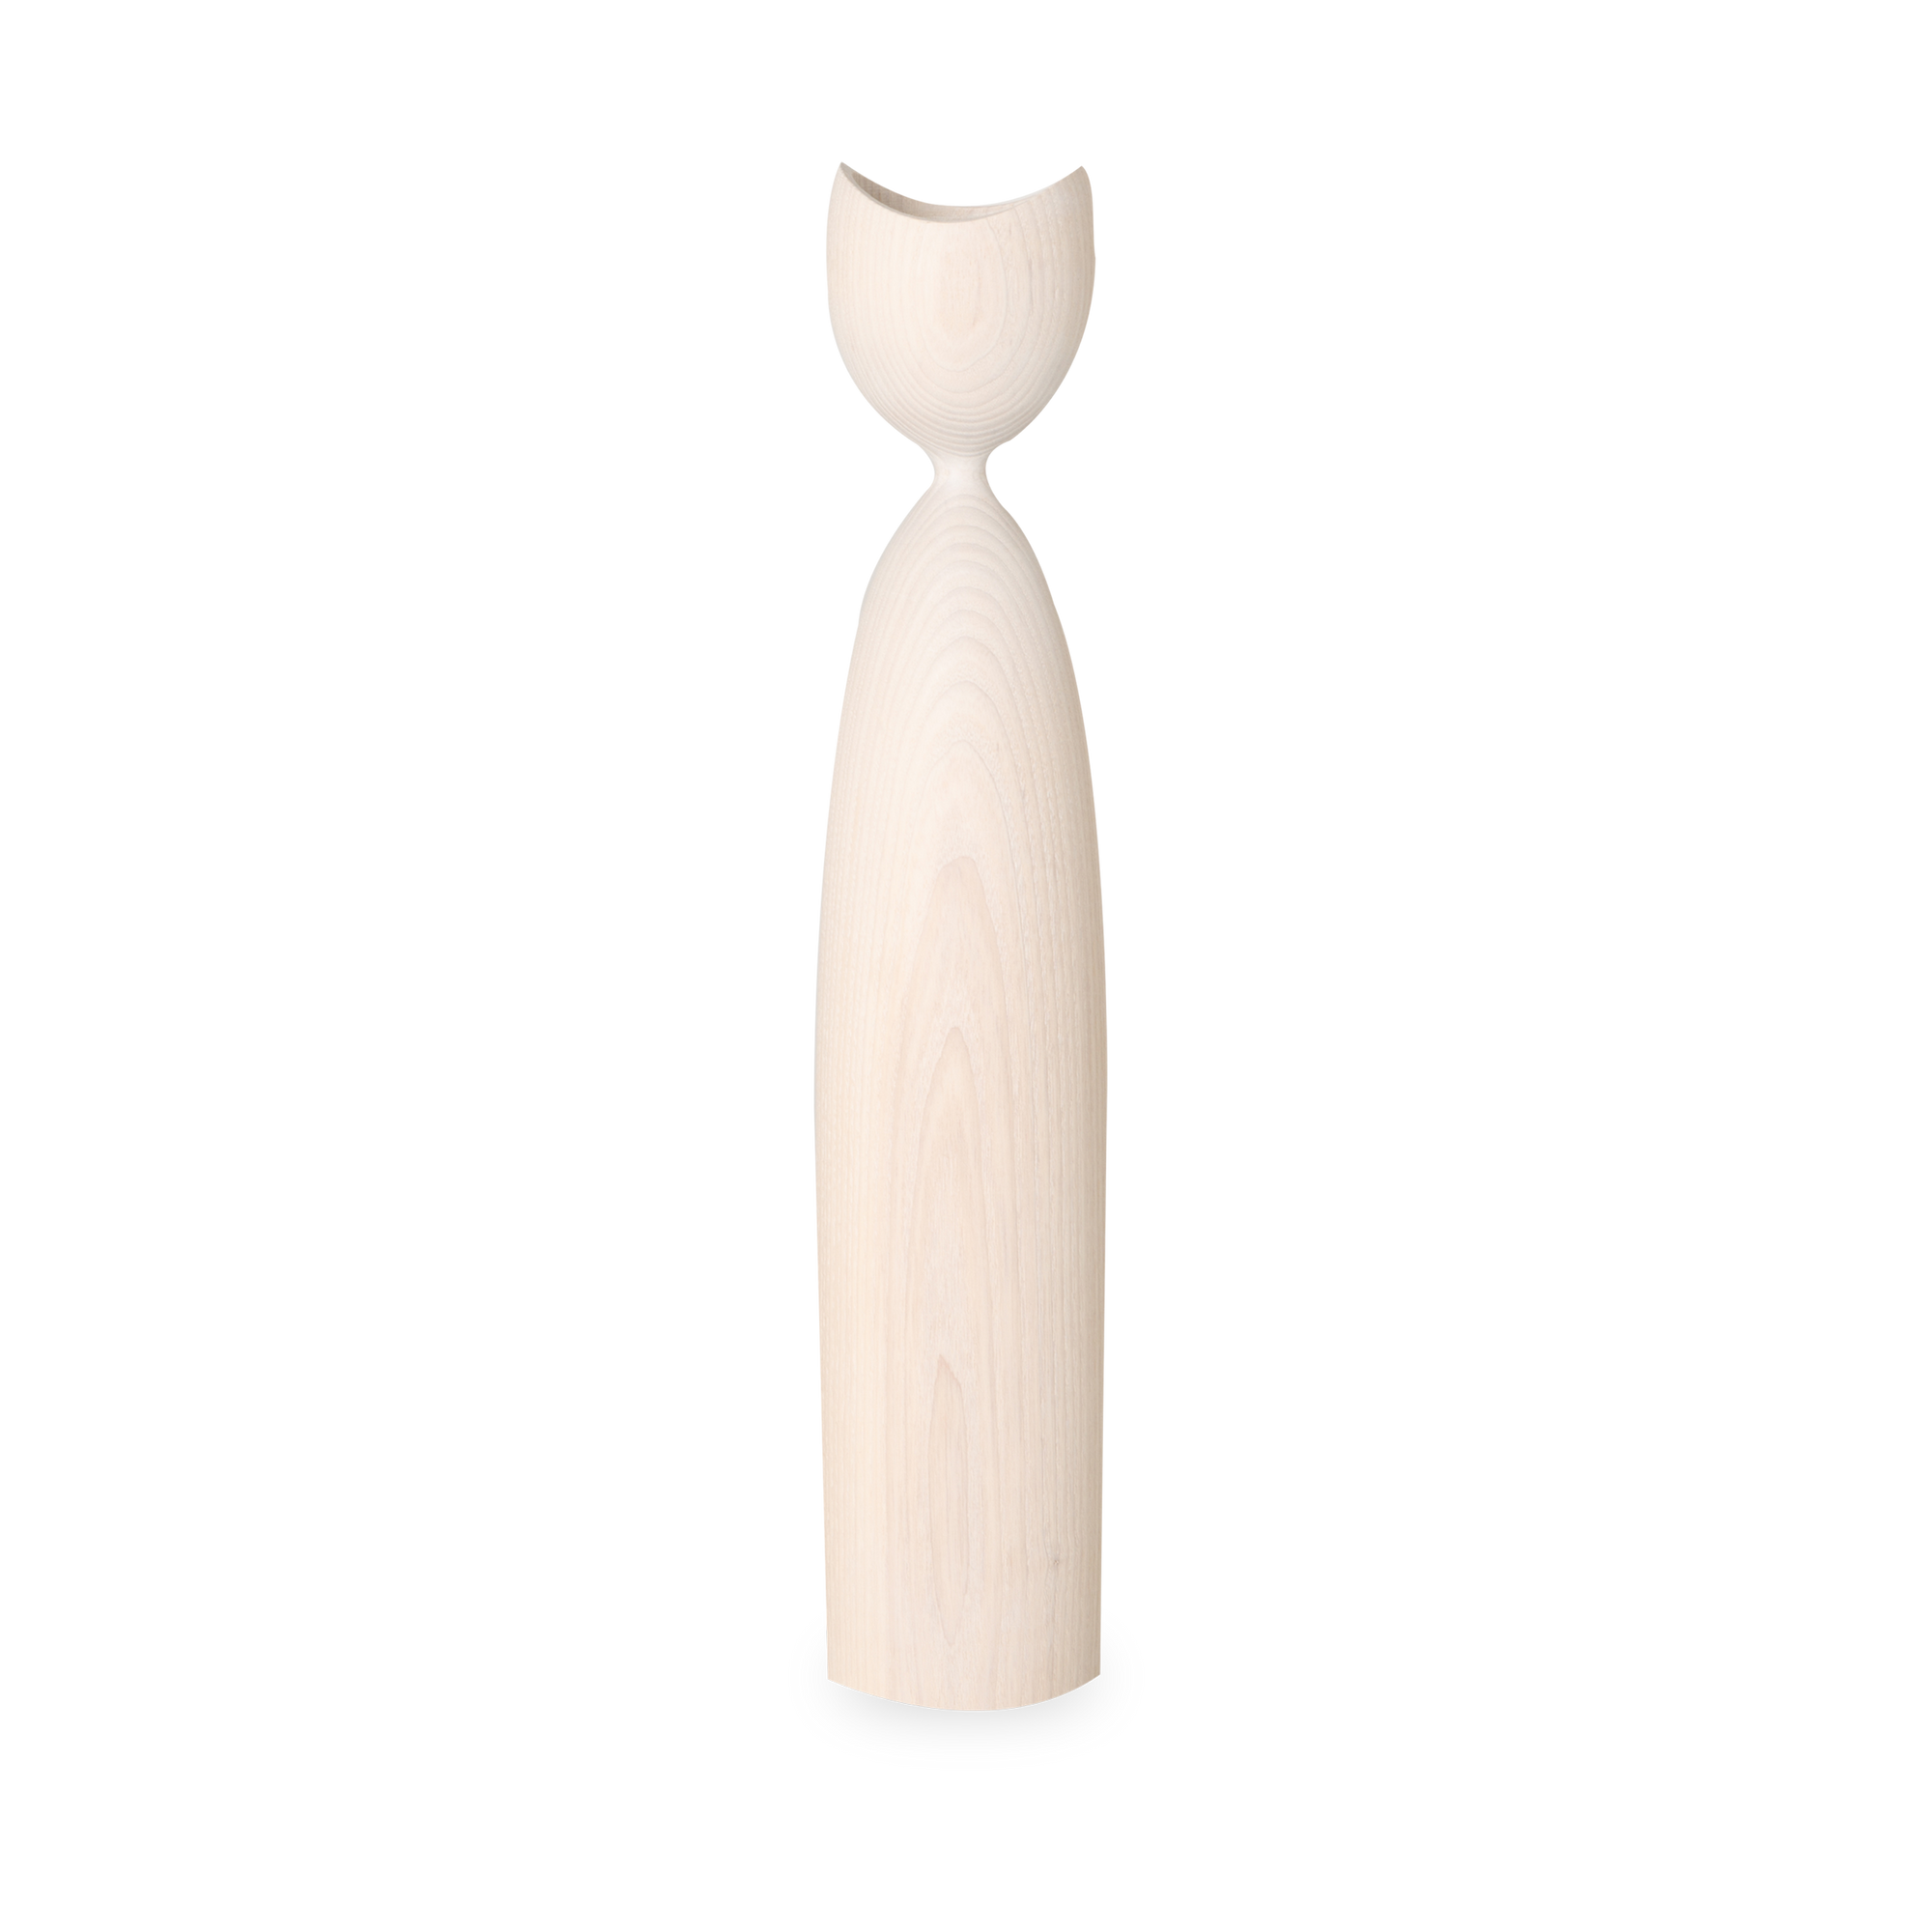 This stunning candle holder is crafted with Ash wood and features a beautiful grain that brings years of beauty and enjoyment.